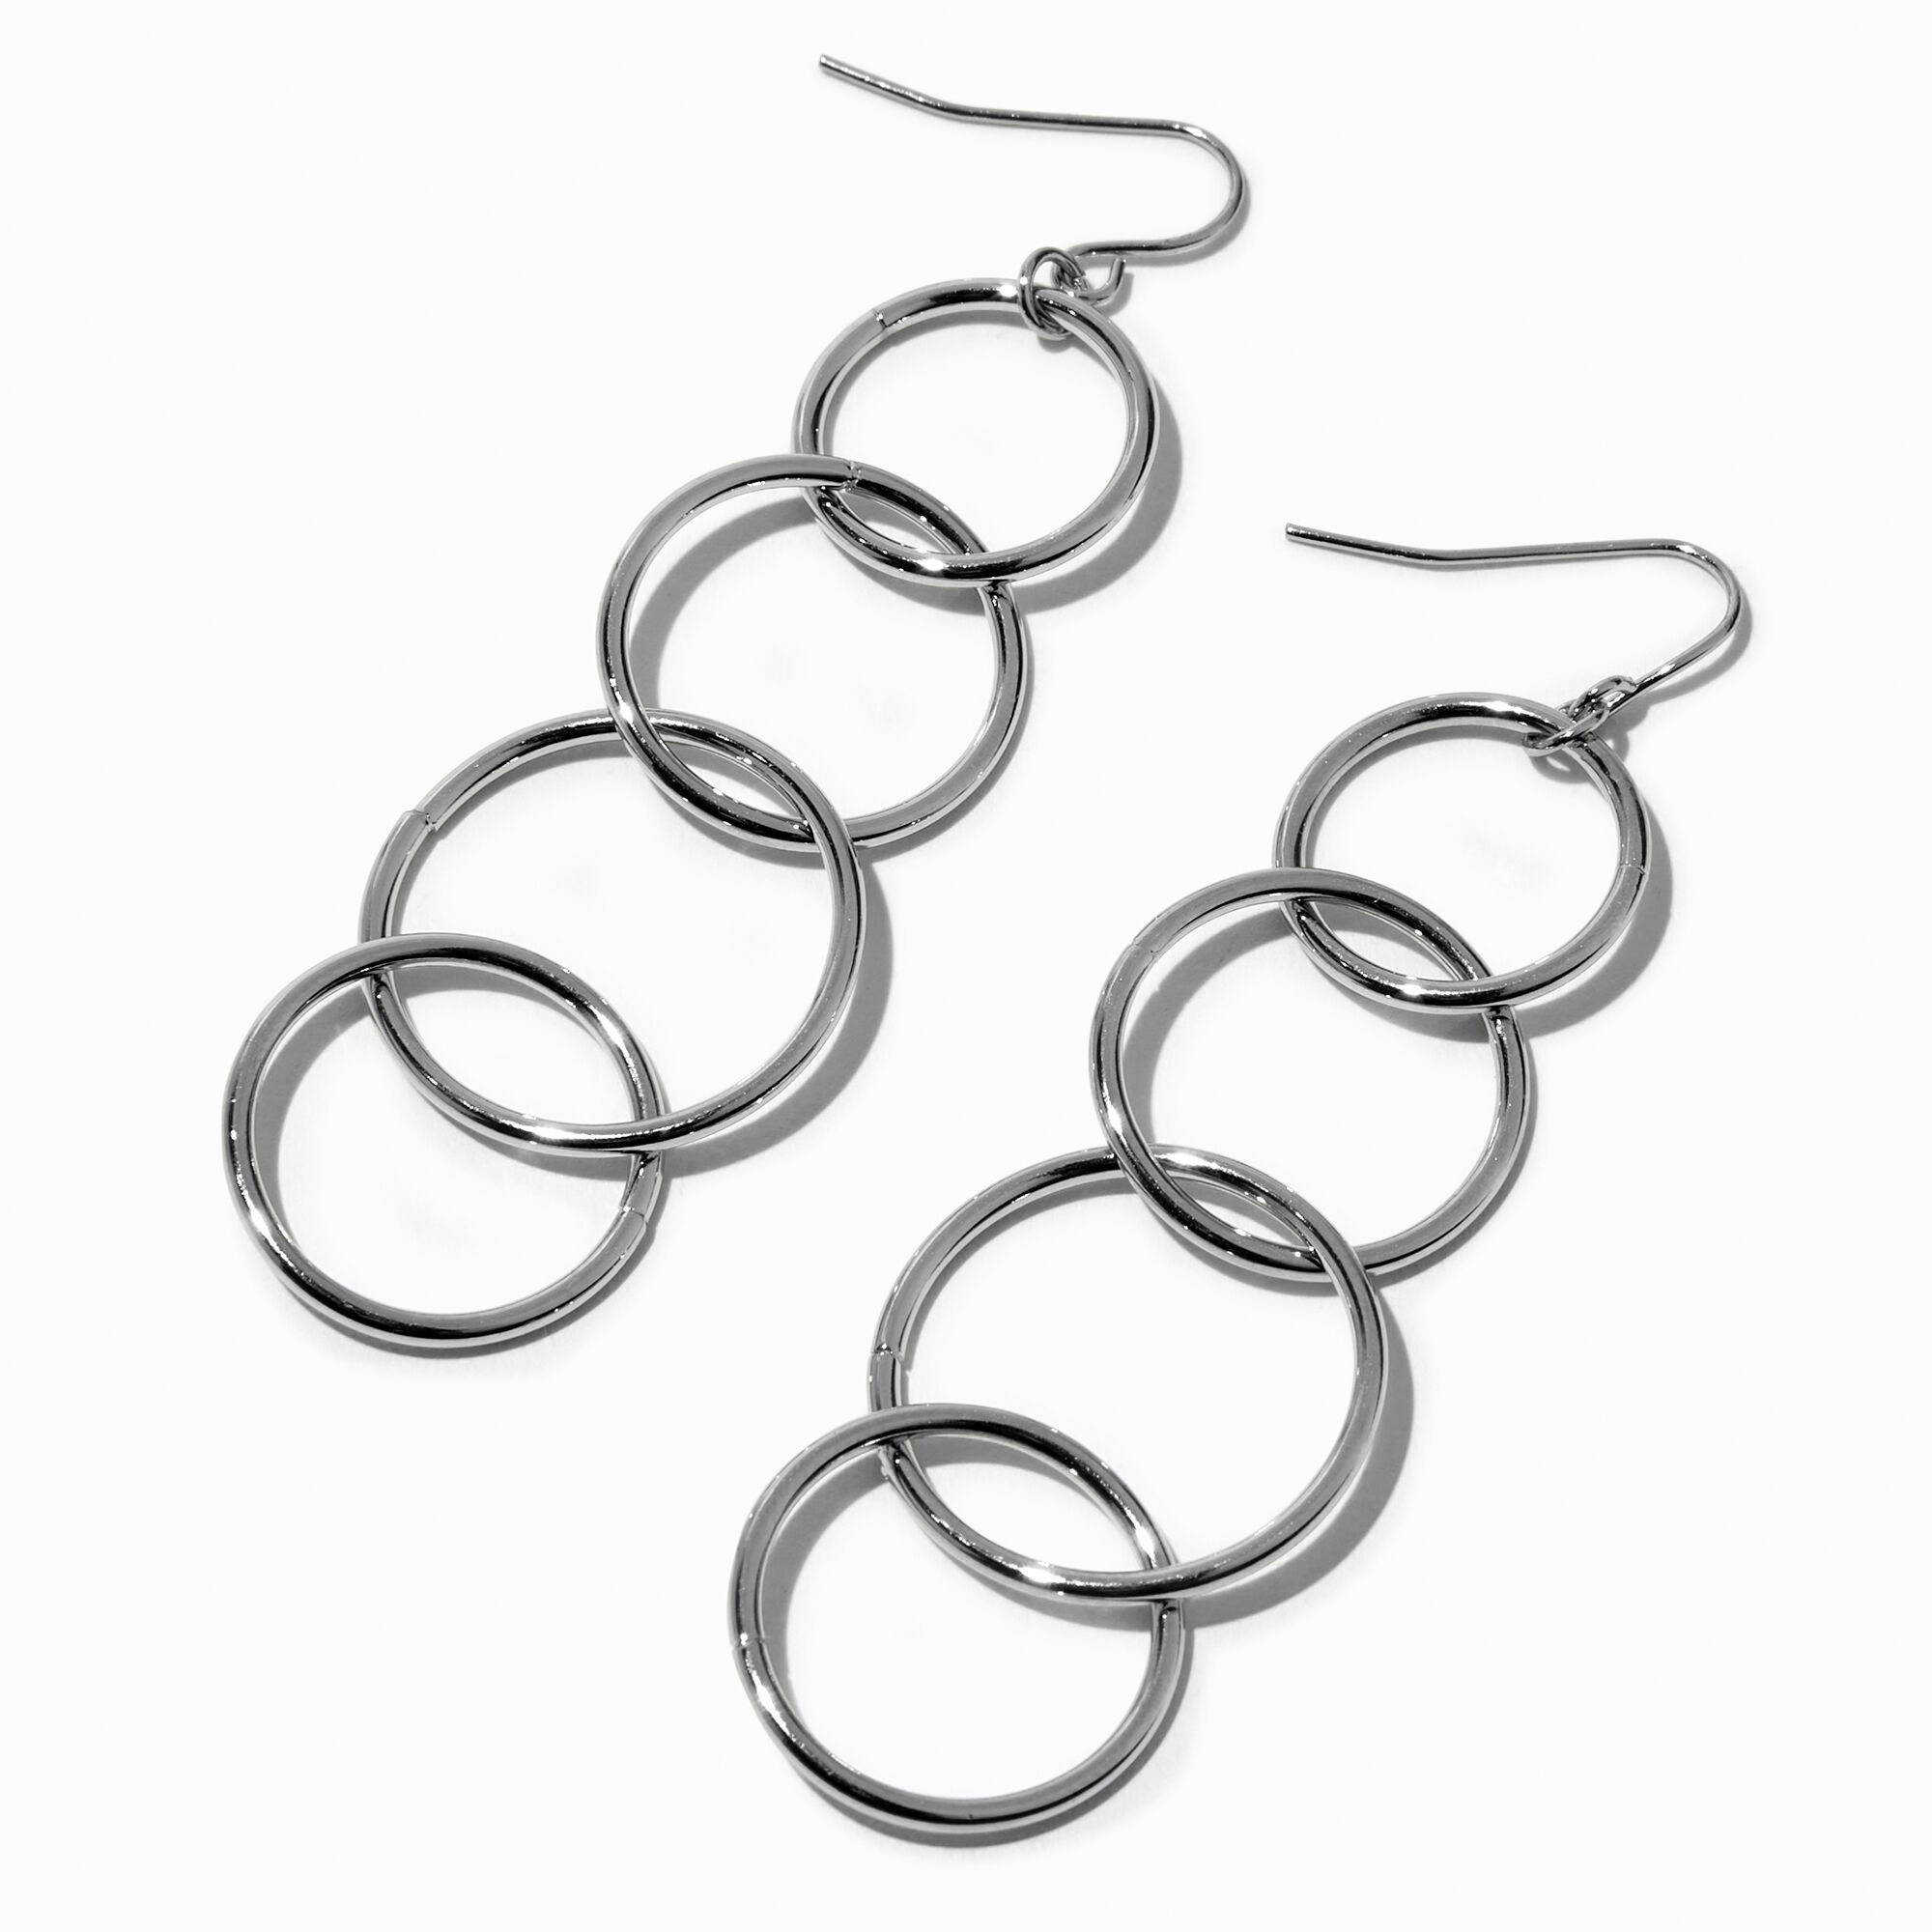 View Claires Tone Rings 3 Drop Earrings Silver information